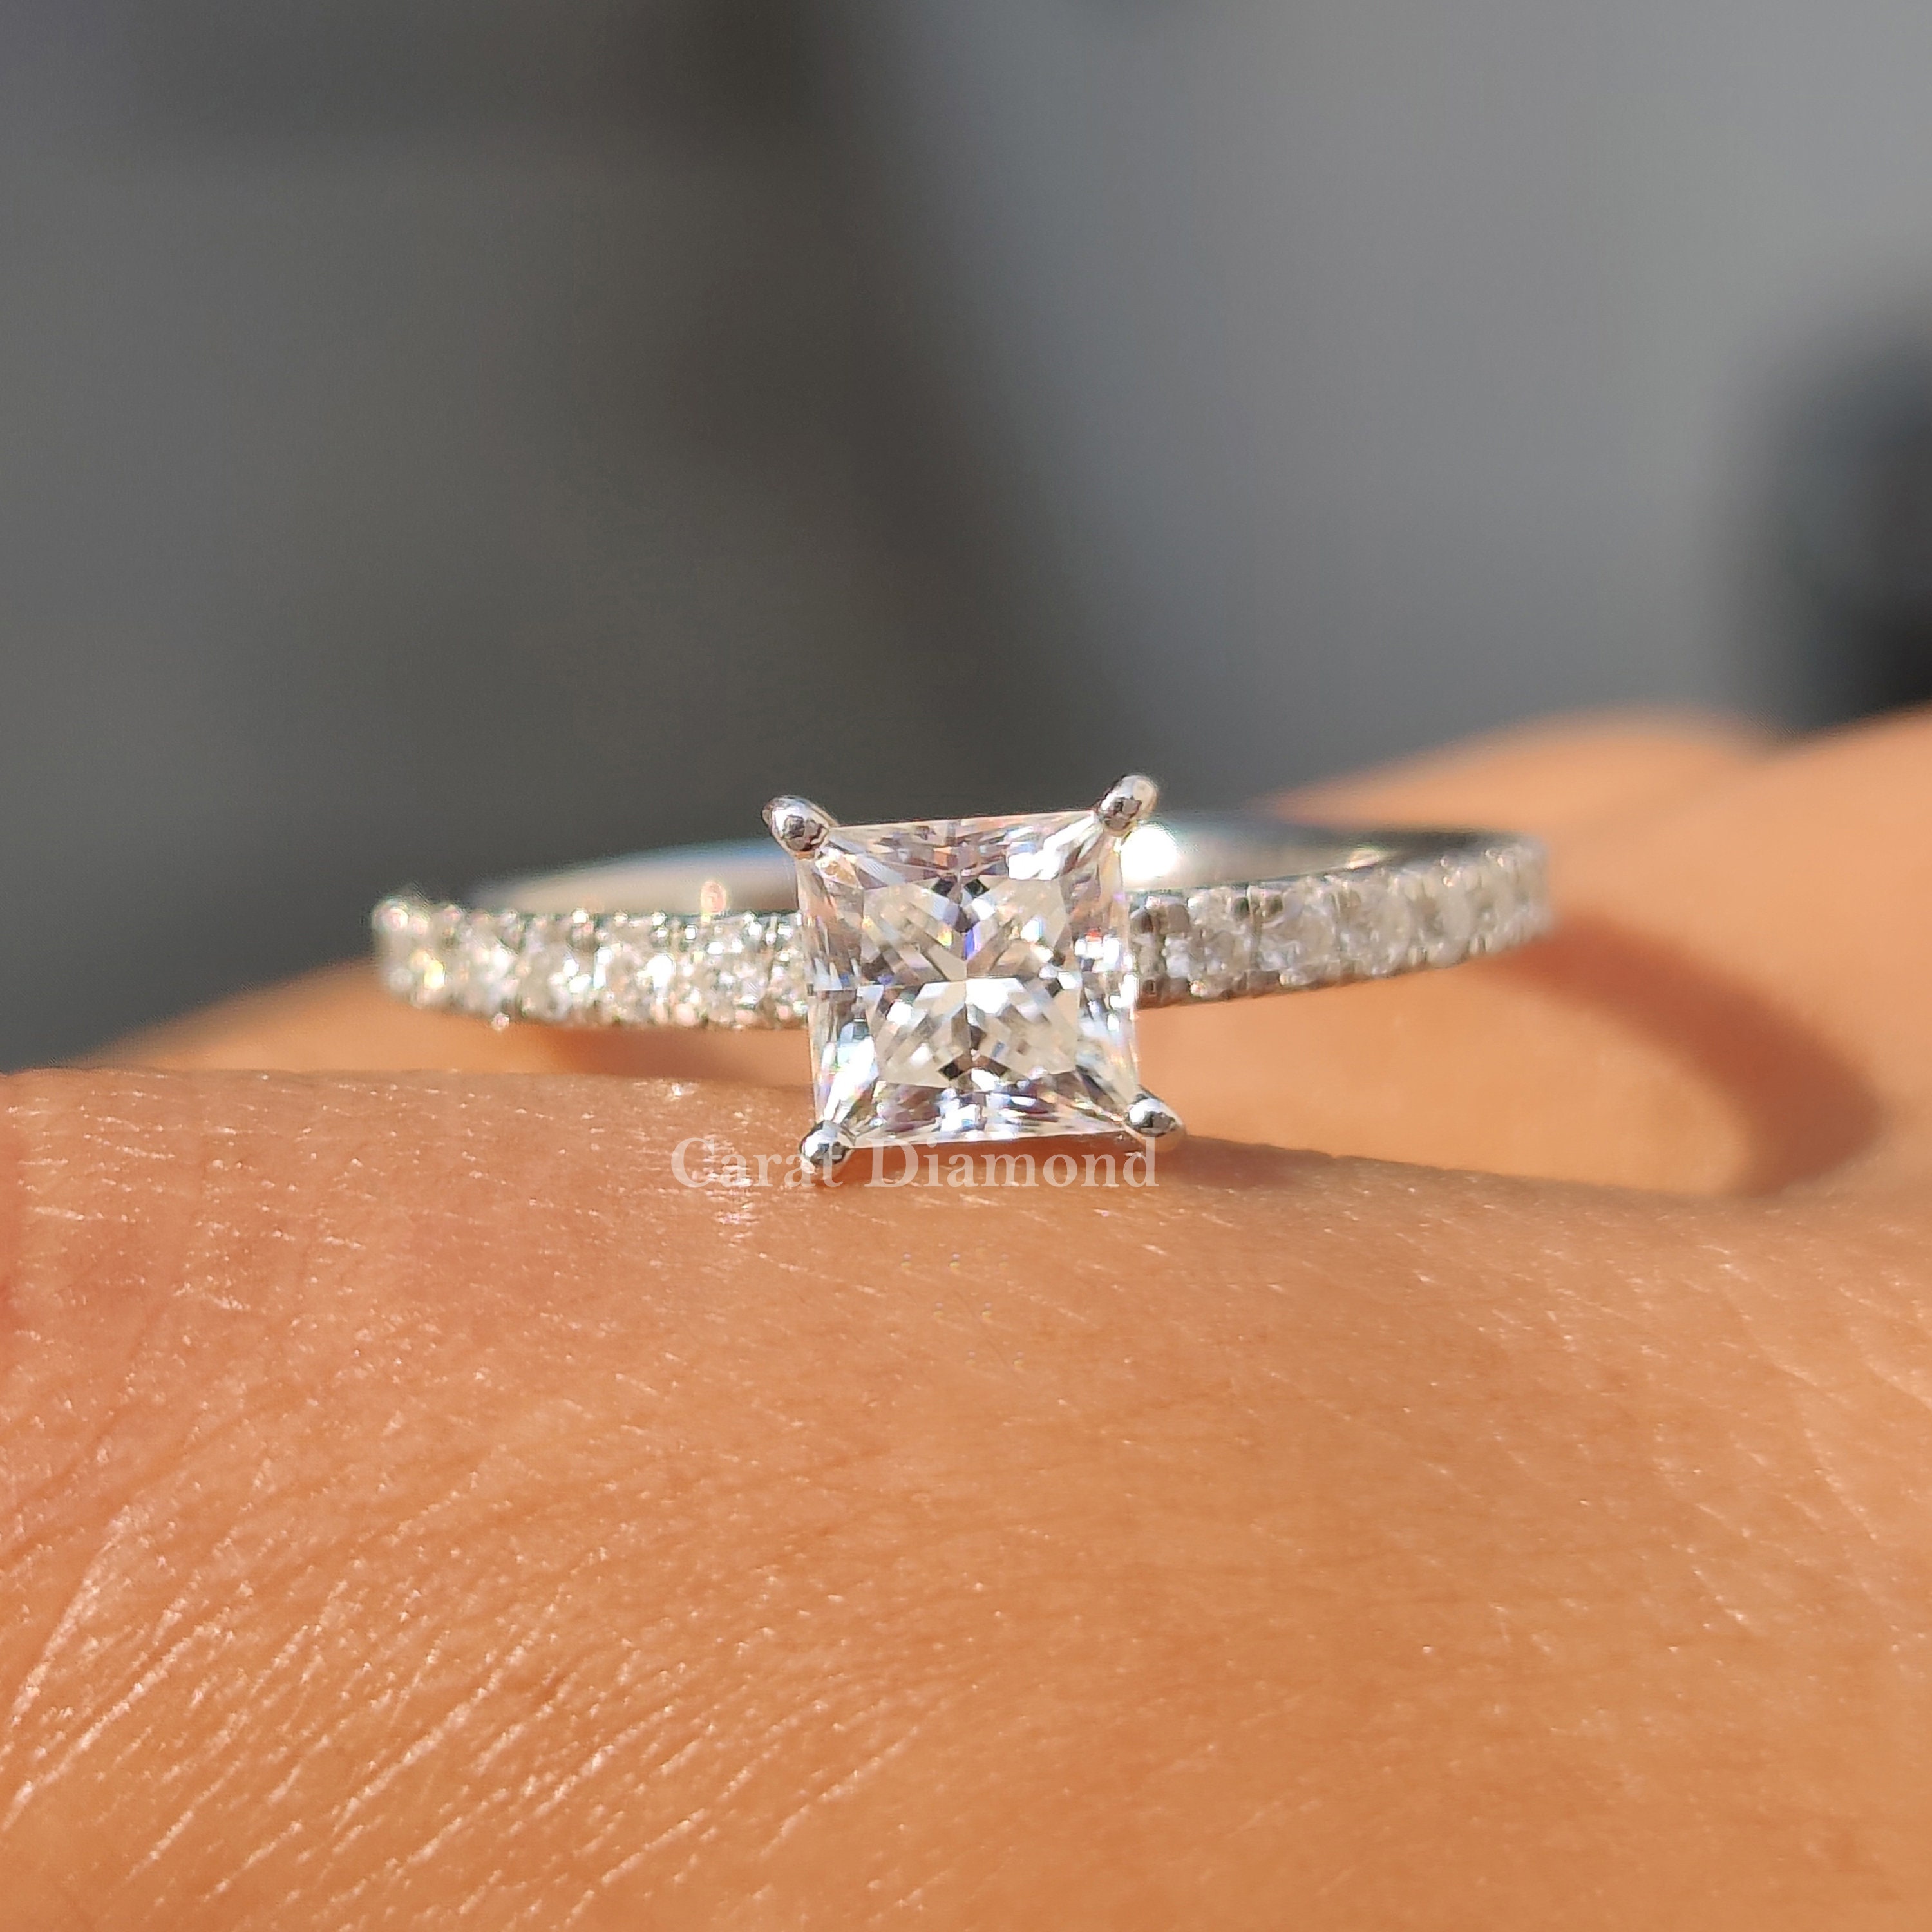 1.07 TW Princess Cut Colorless Moissanite Engagement Ring